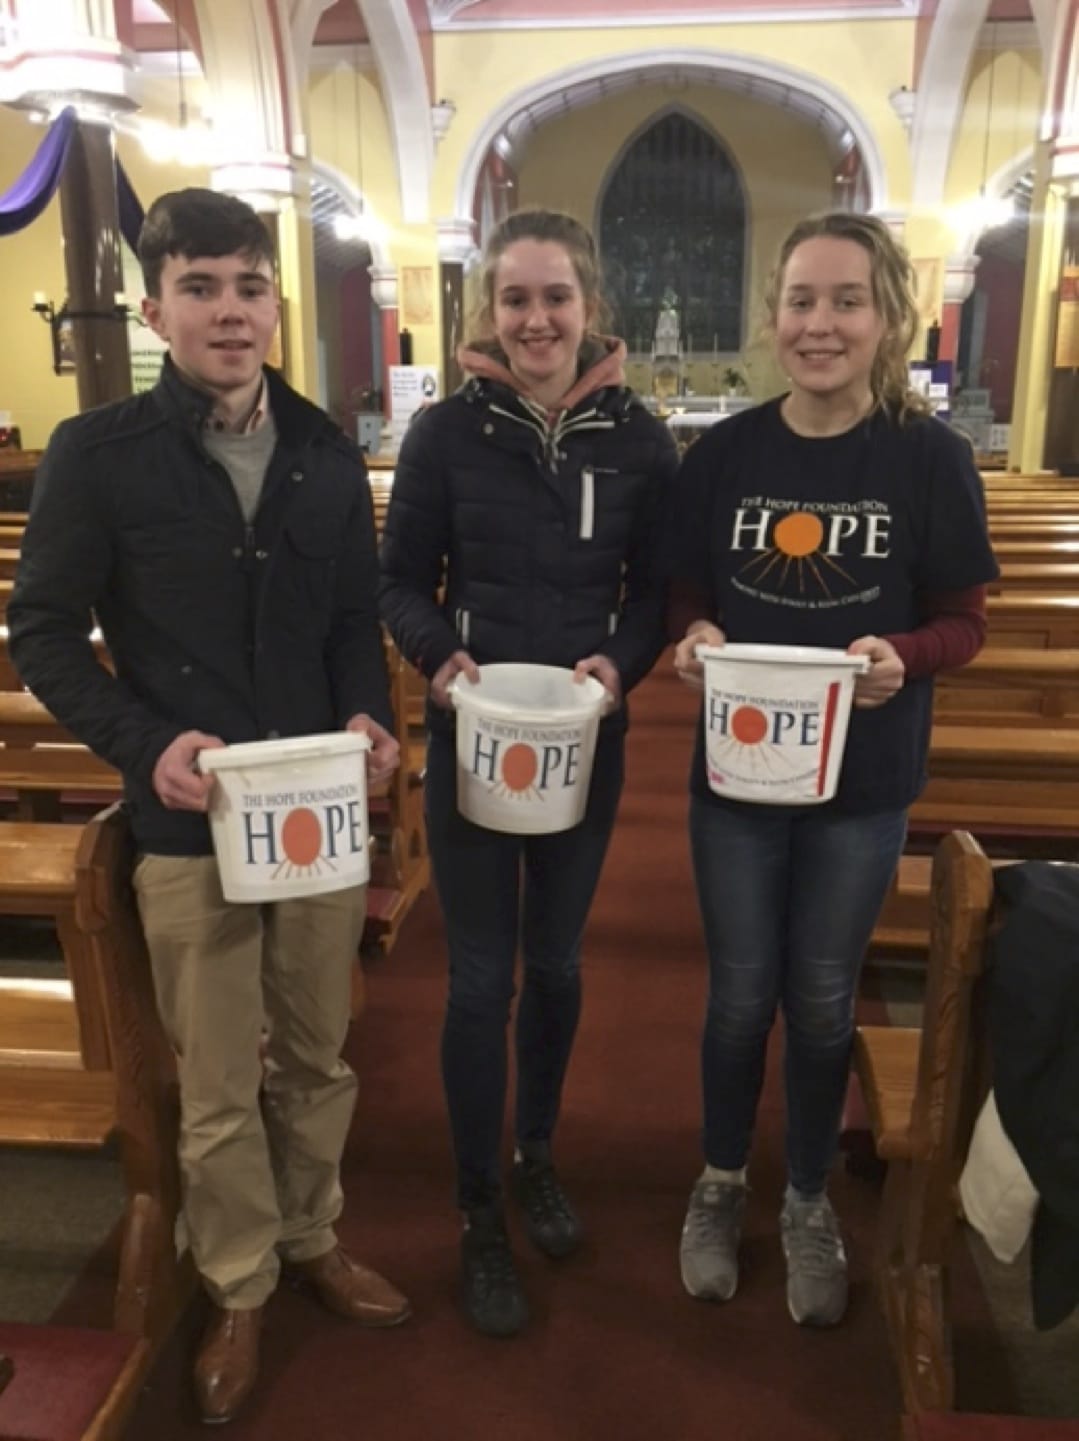 March 2017: Desmond College TY Students speaking and fundraising at all Masses in Newcastle West this weekend for their upcoming trip to Kolkata